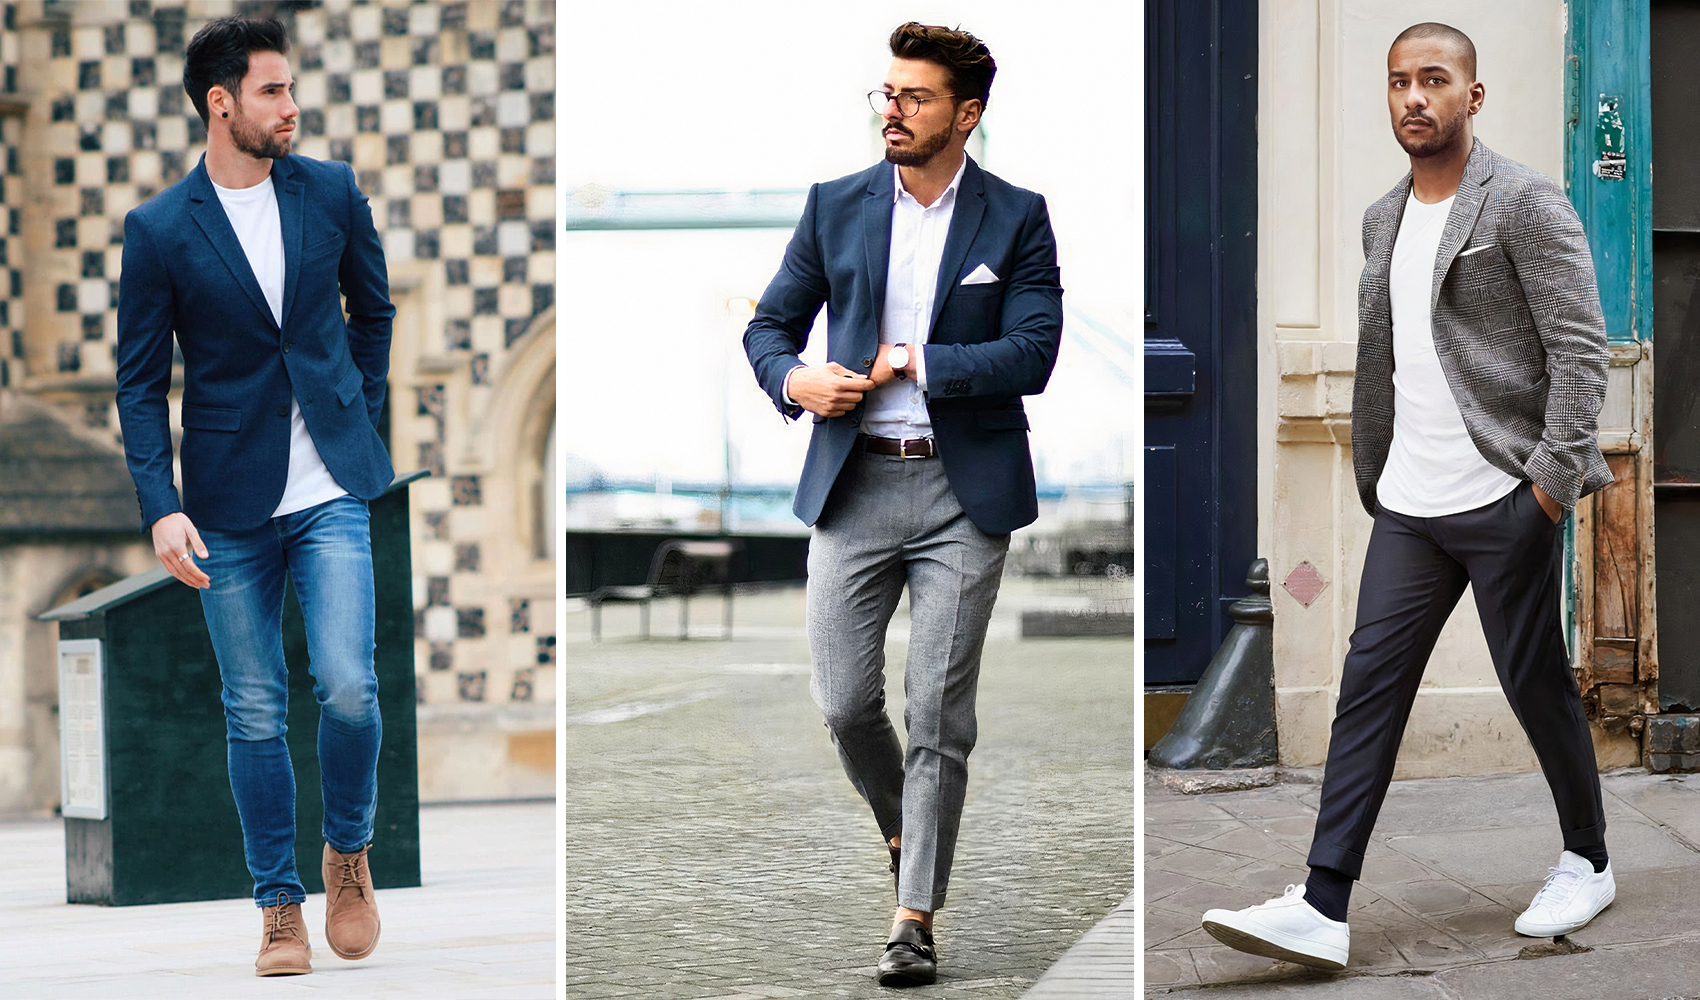 The #1 Guide For Men's Dress Codes | Traditional Attire | Smart Casual | Casual  Dress Code - MR KOACHMAN